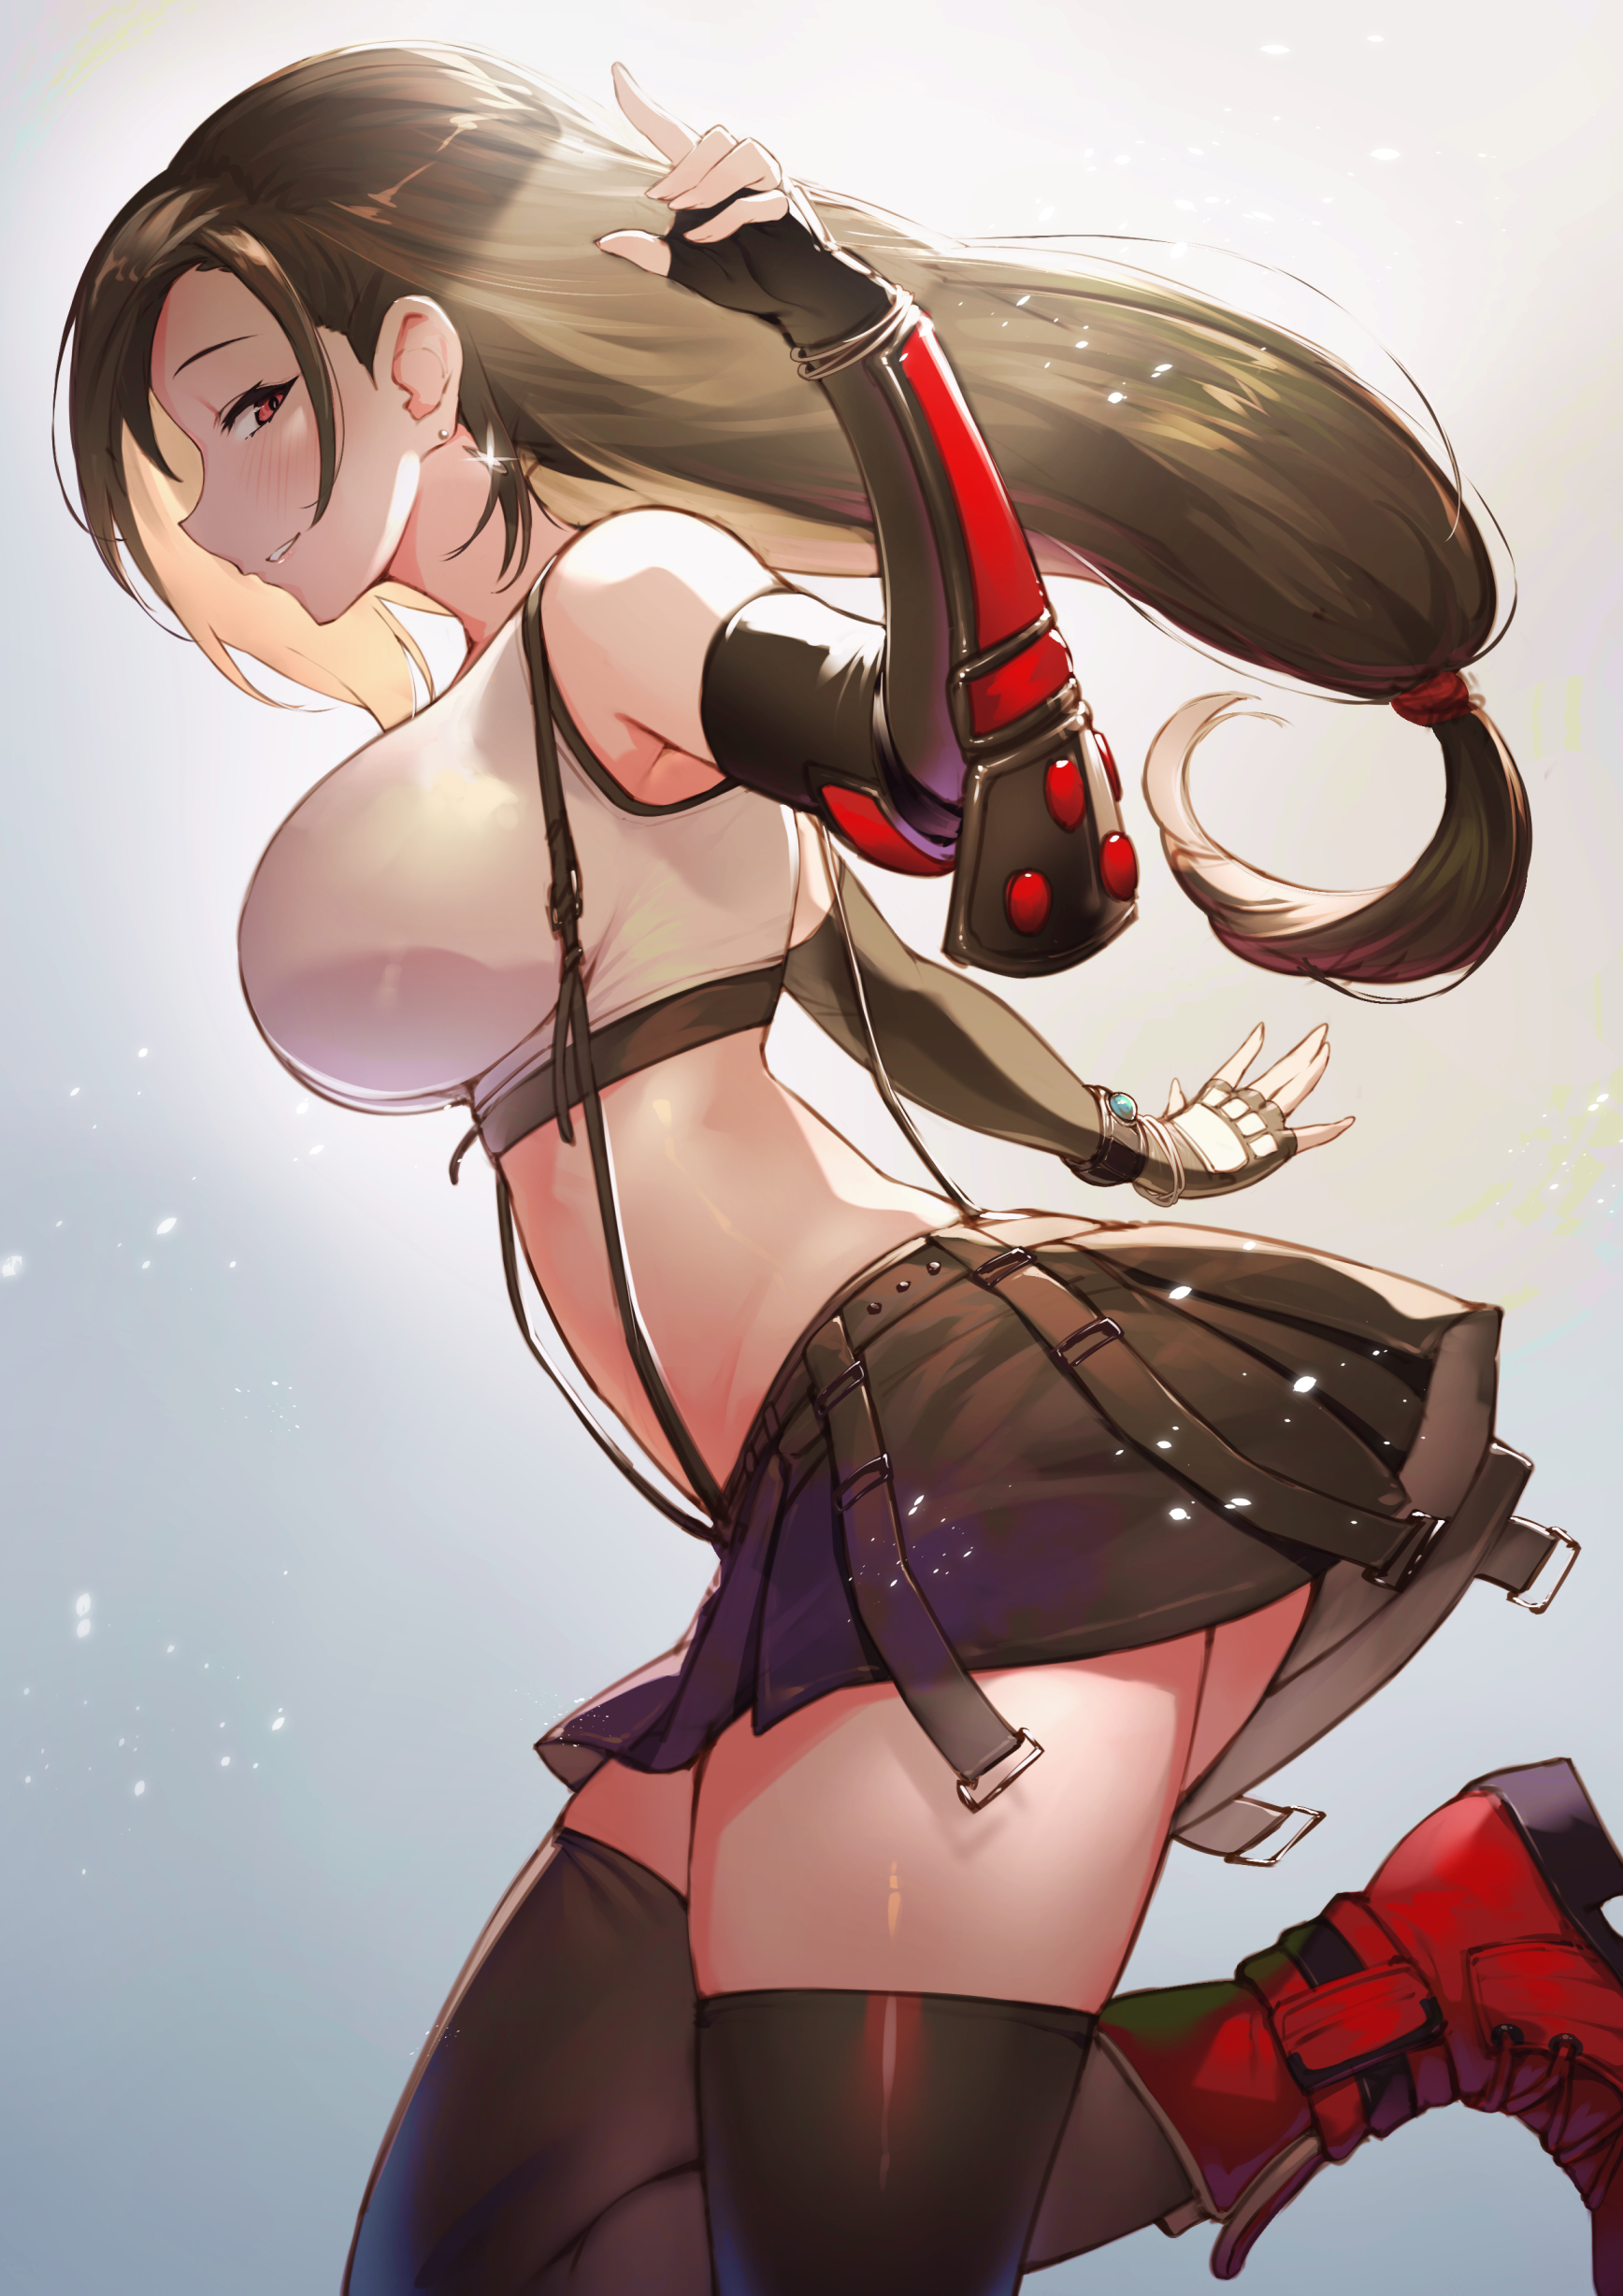 Anime 1736x2456 Tifa Lockhart Final Fantasy Final Fantasy VII video games video game characters video game girls brunette long hair arm warmers red eyes suspenders thigh-highs boots portrait display vertical 2D artwork drawing digital art illustration fan art smiling side view Pyz anime girls